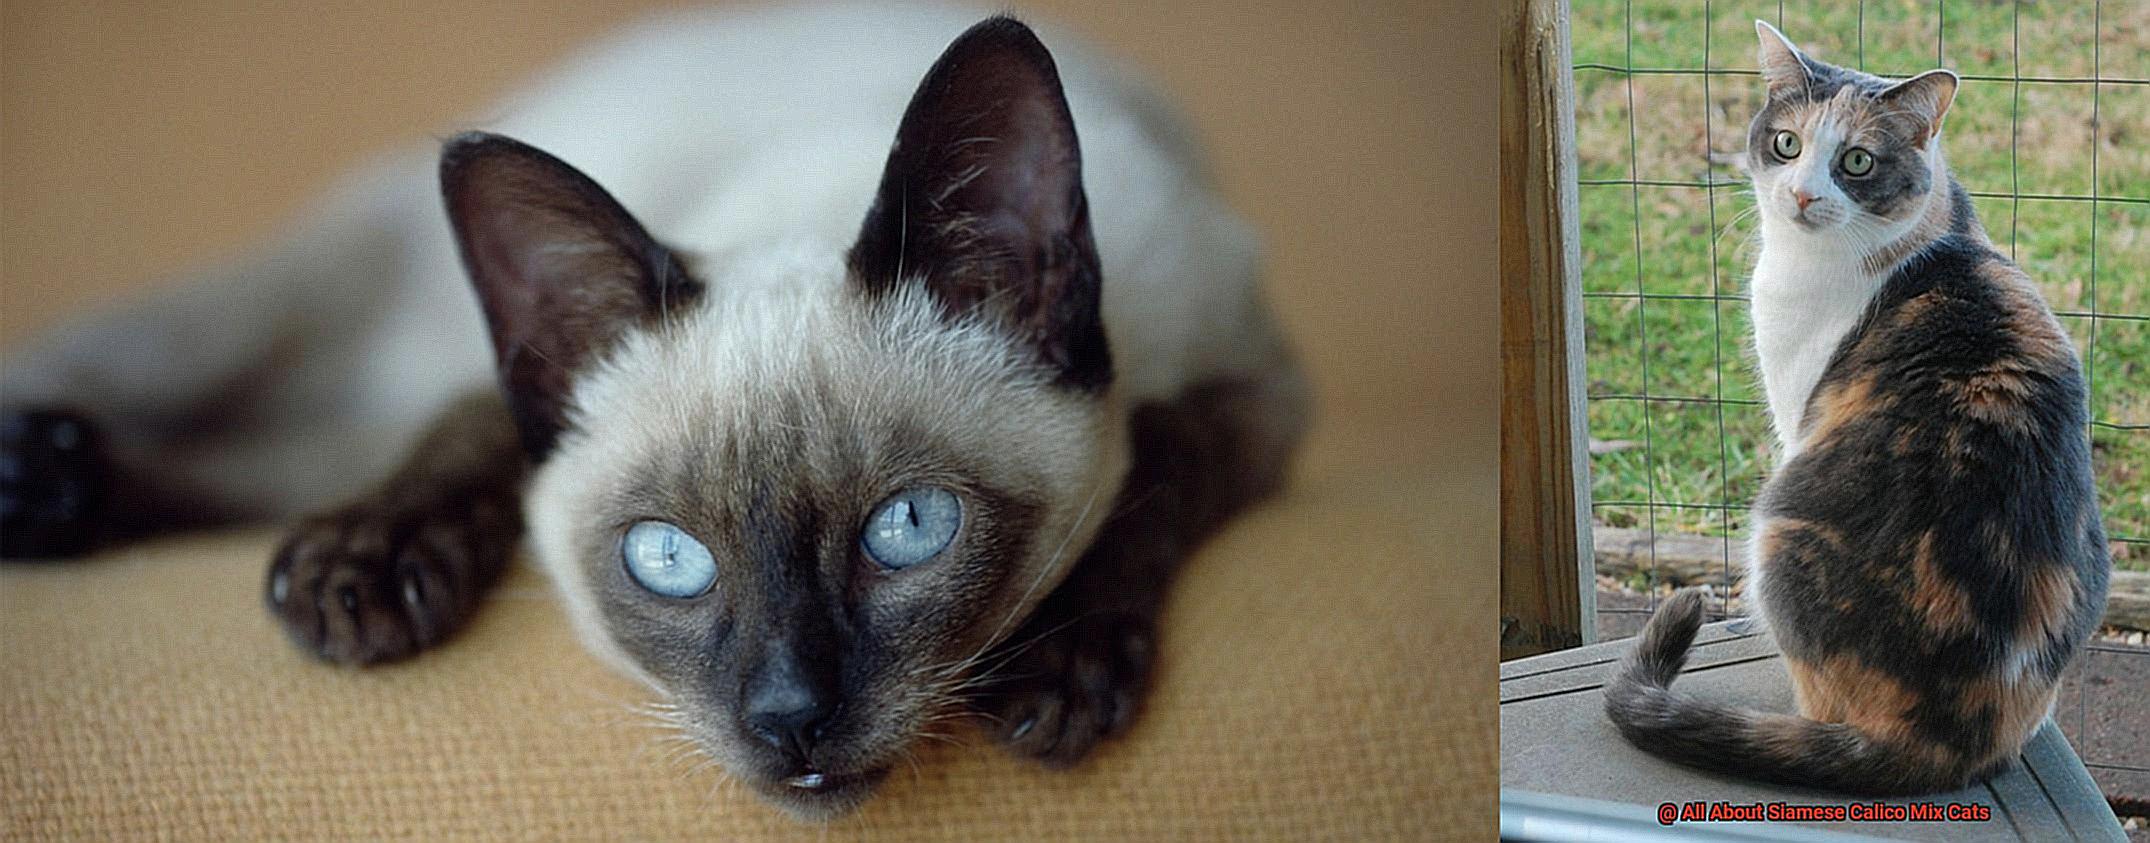 All About Siamese Calico Mix Cats-2